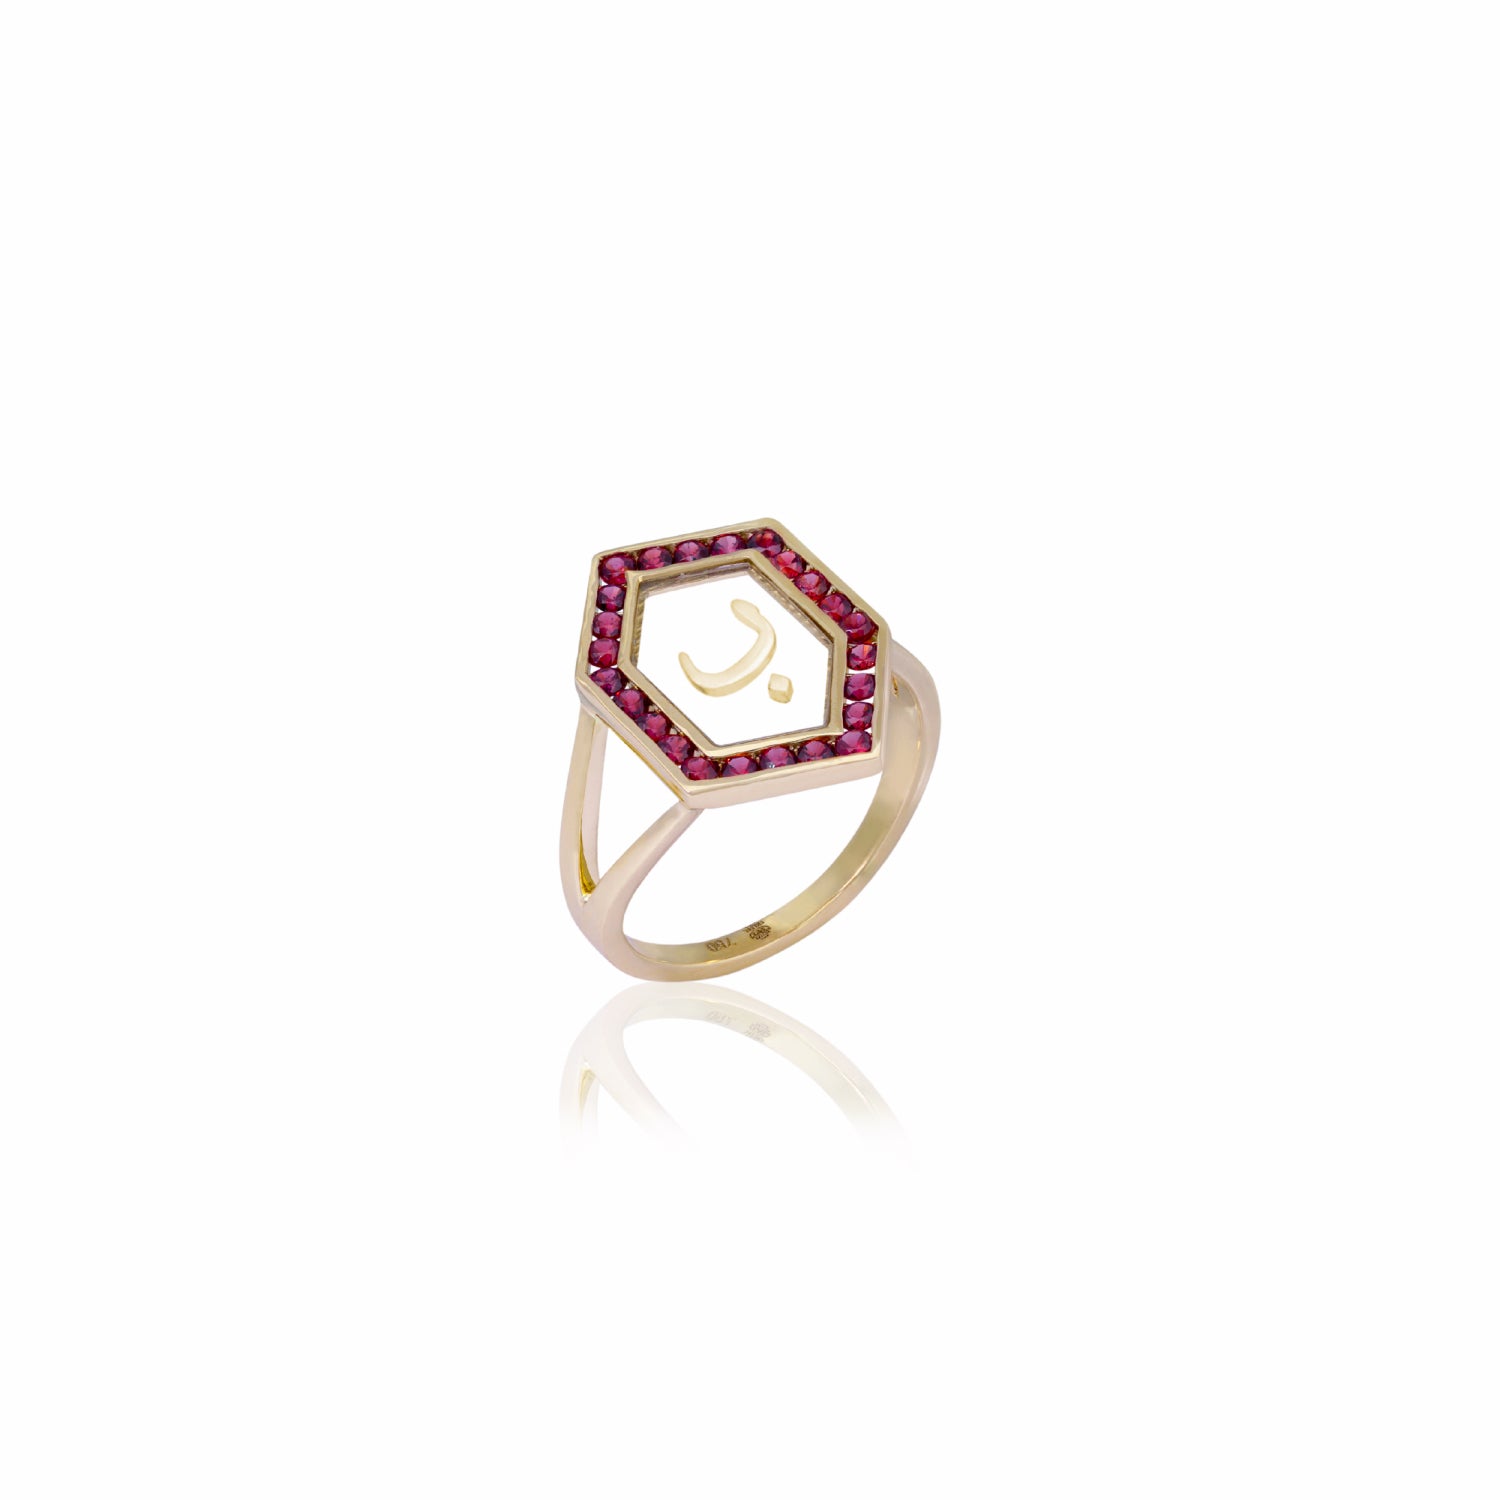 Qamoos 1.0 Letter ب Ruby Ring in Yellow Gold